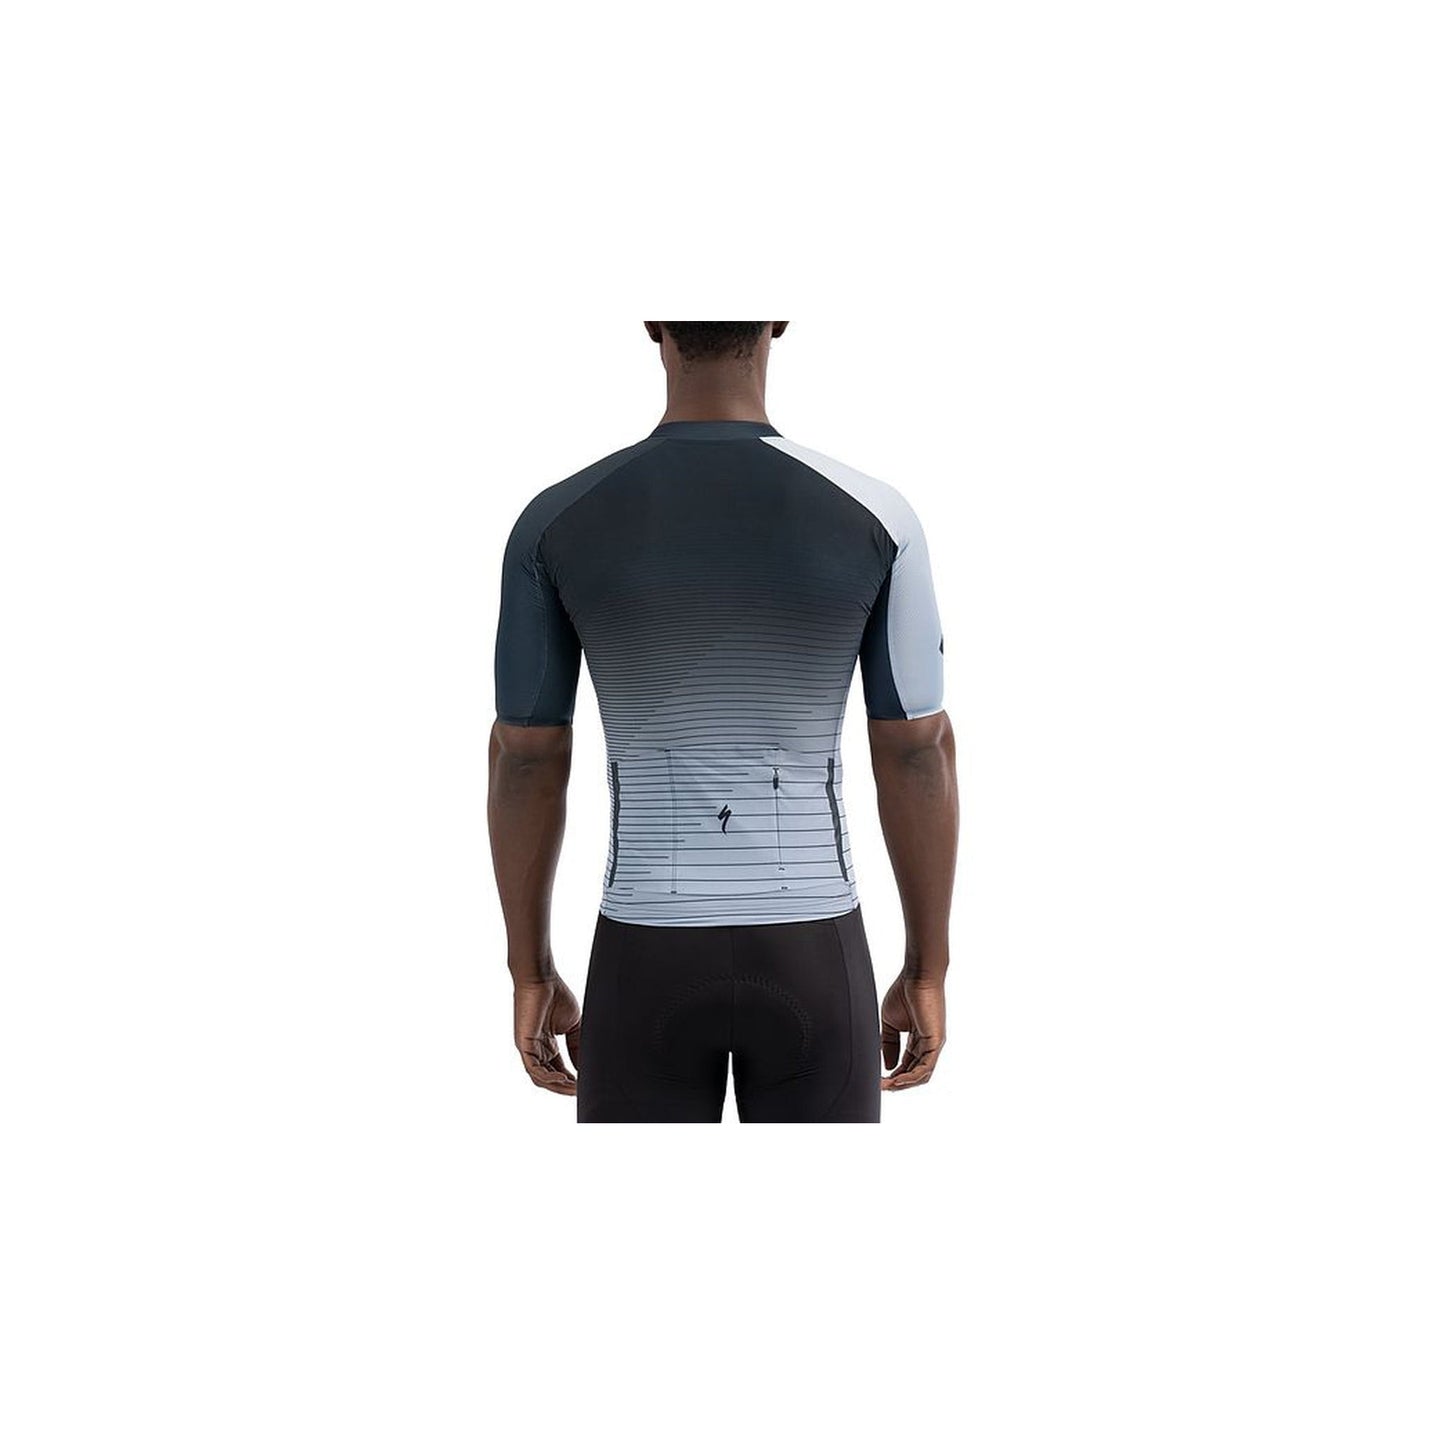 Men's SL Race Jersey-Cycles Direct Specialized